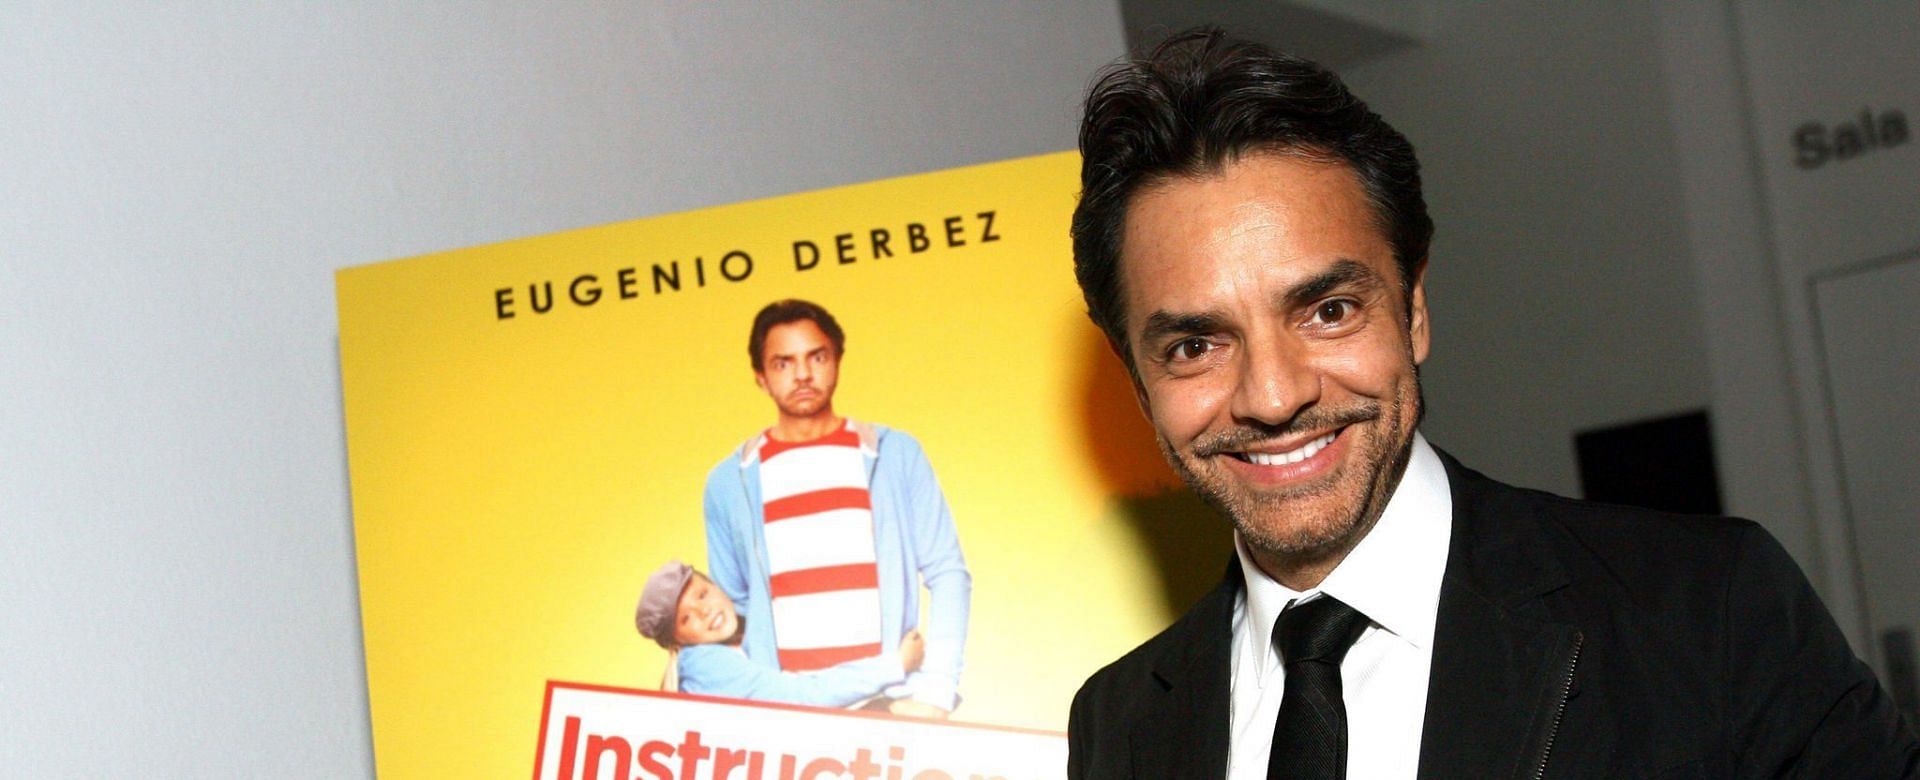 Johnny Depp&#039;s cameo in &#039;Instructions Not Included&#039; was made by his impersonator (Image via Getty Images)